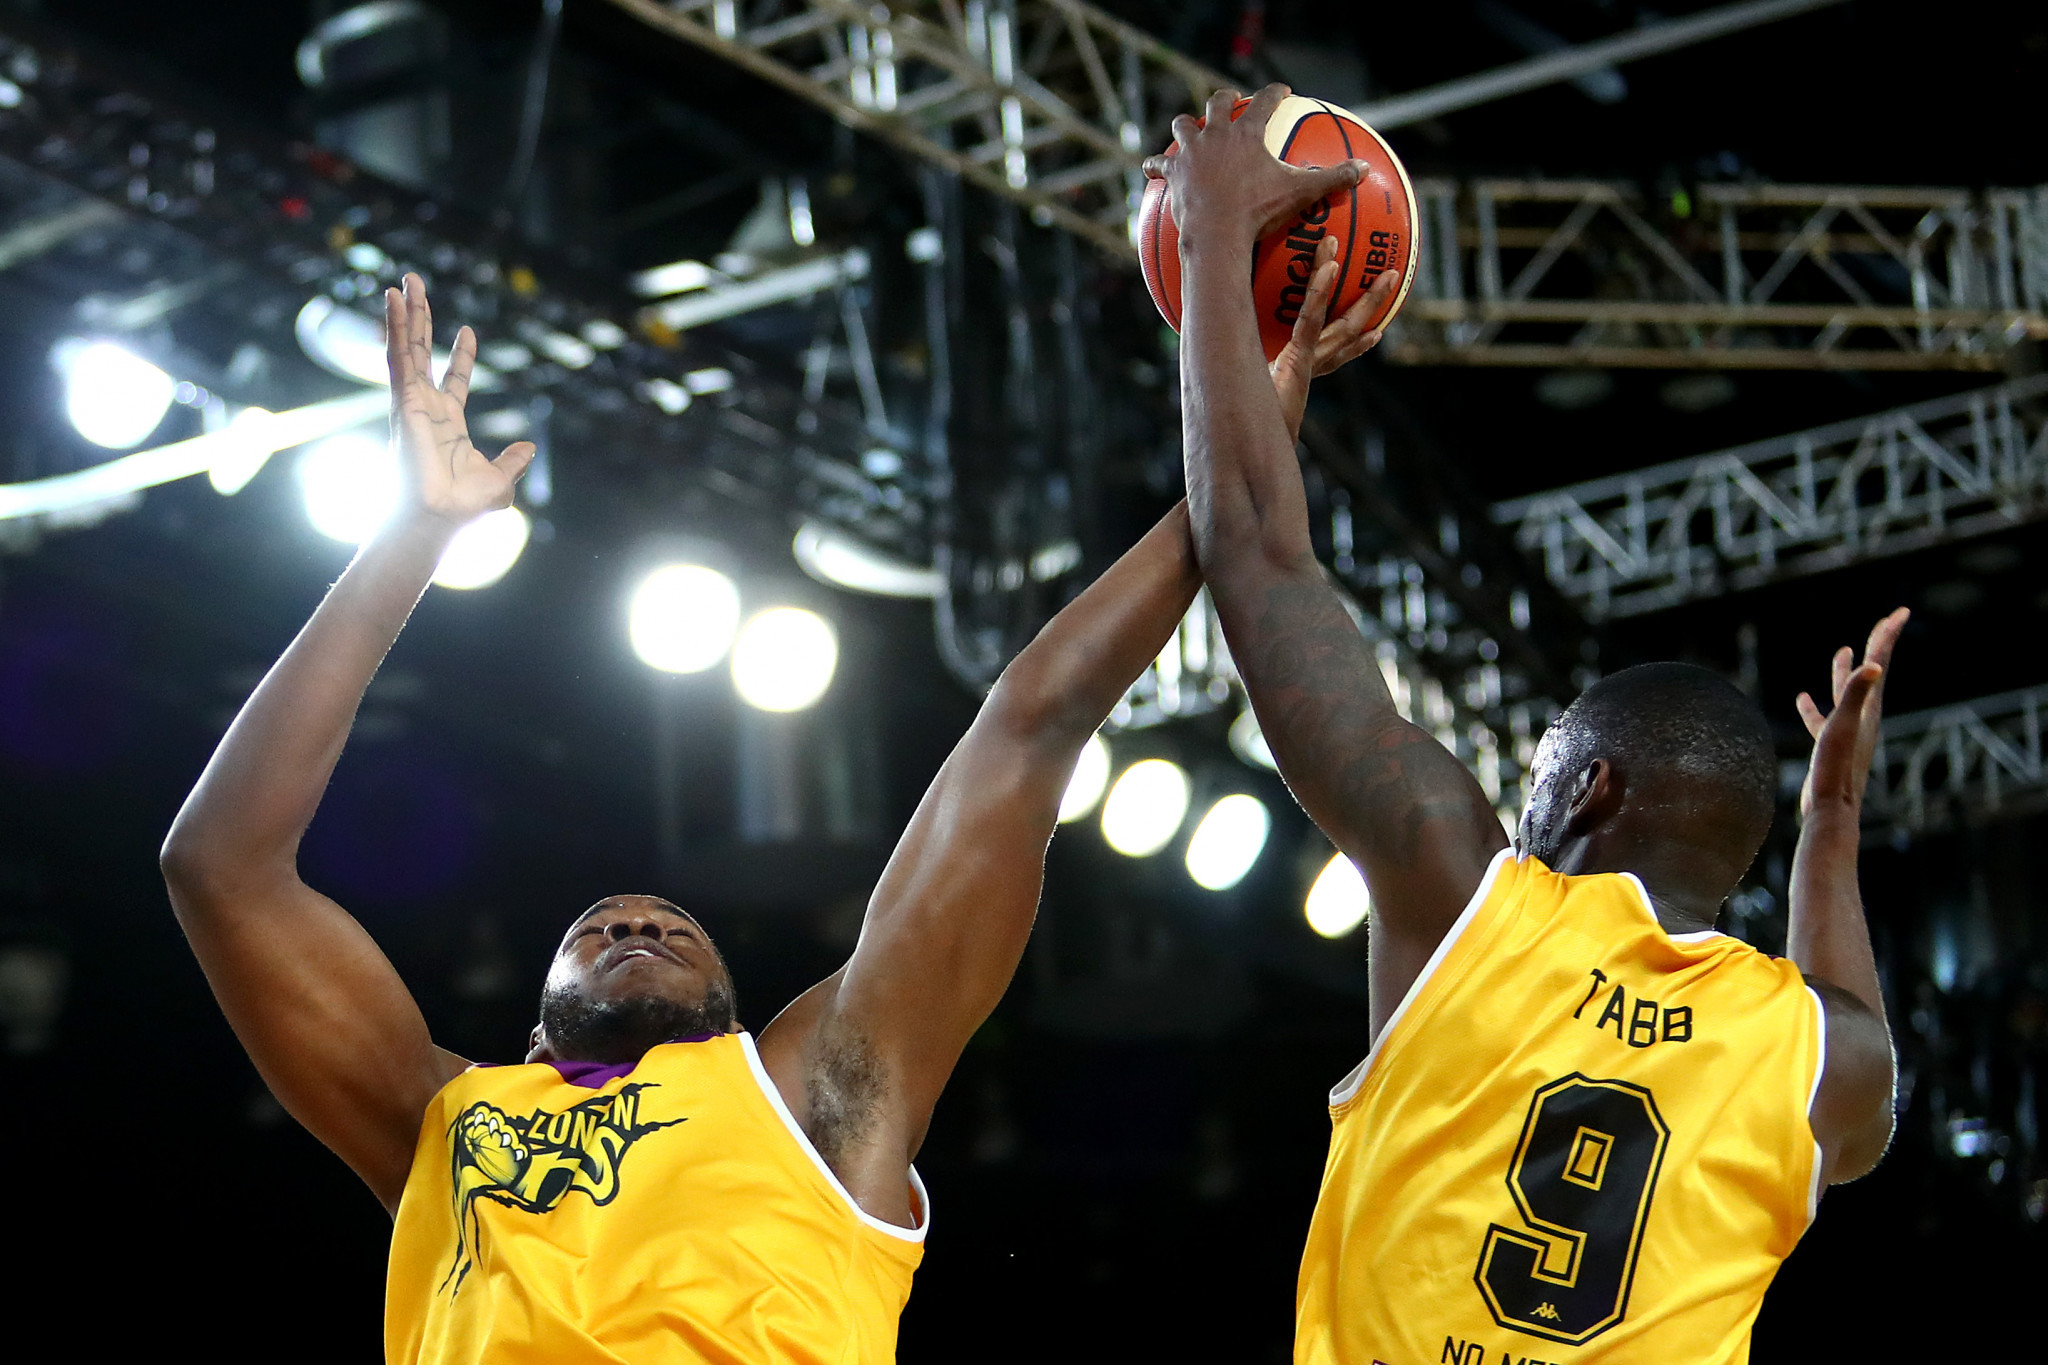 The London Lions are the reigning BBL champions ©Getty Images